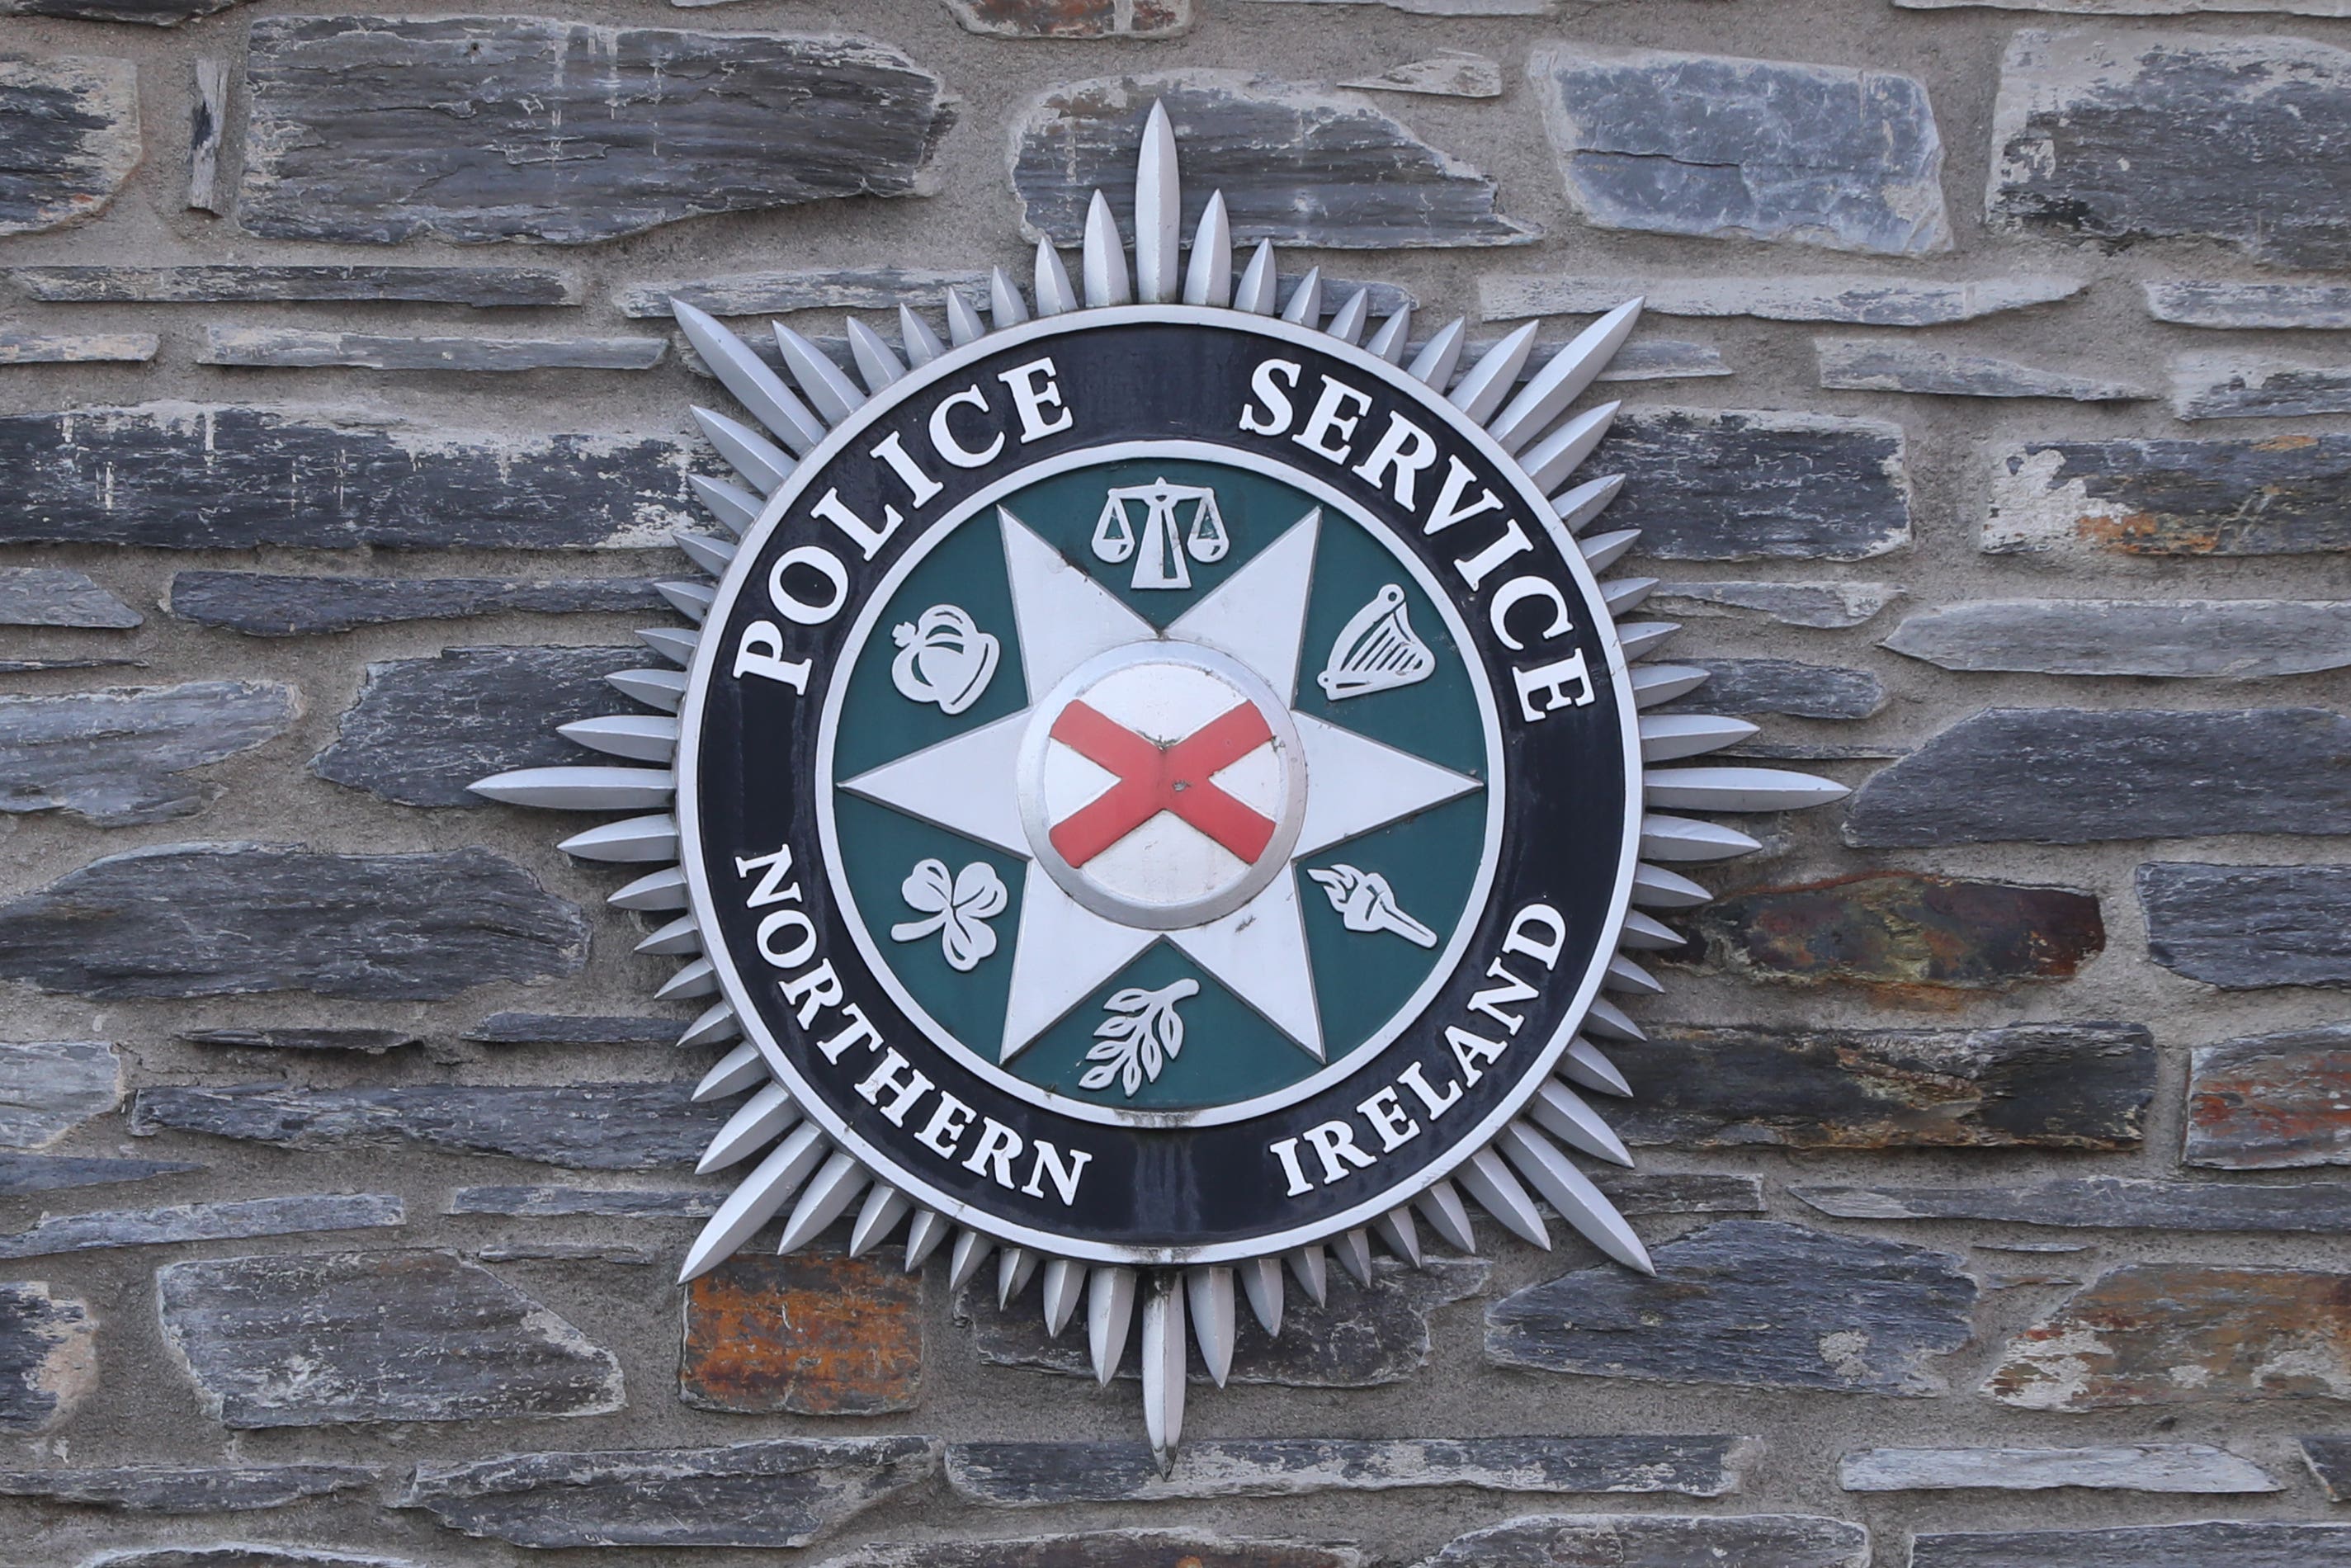 Theft of wreaths from war memorial in Londonderry investigated as hate crime The Independent